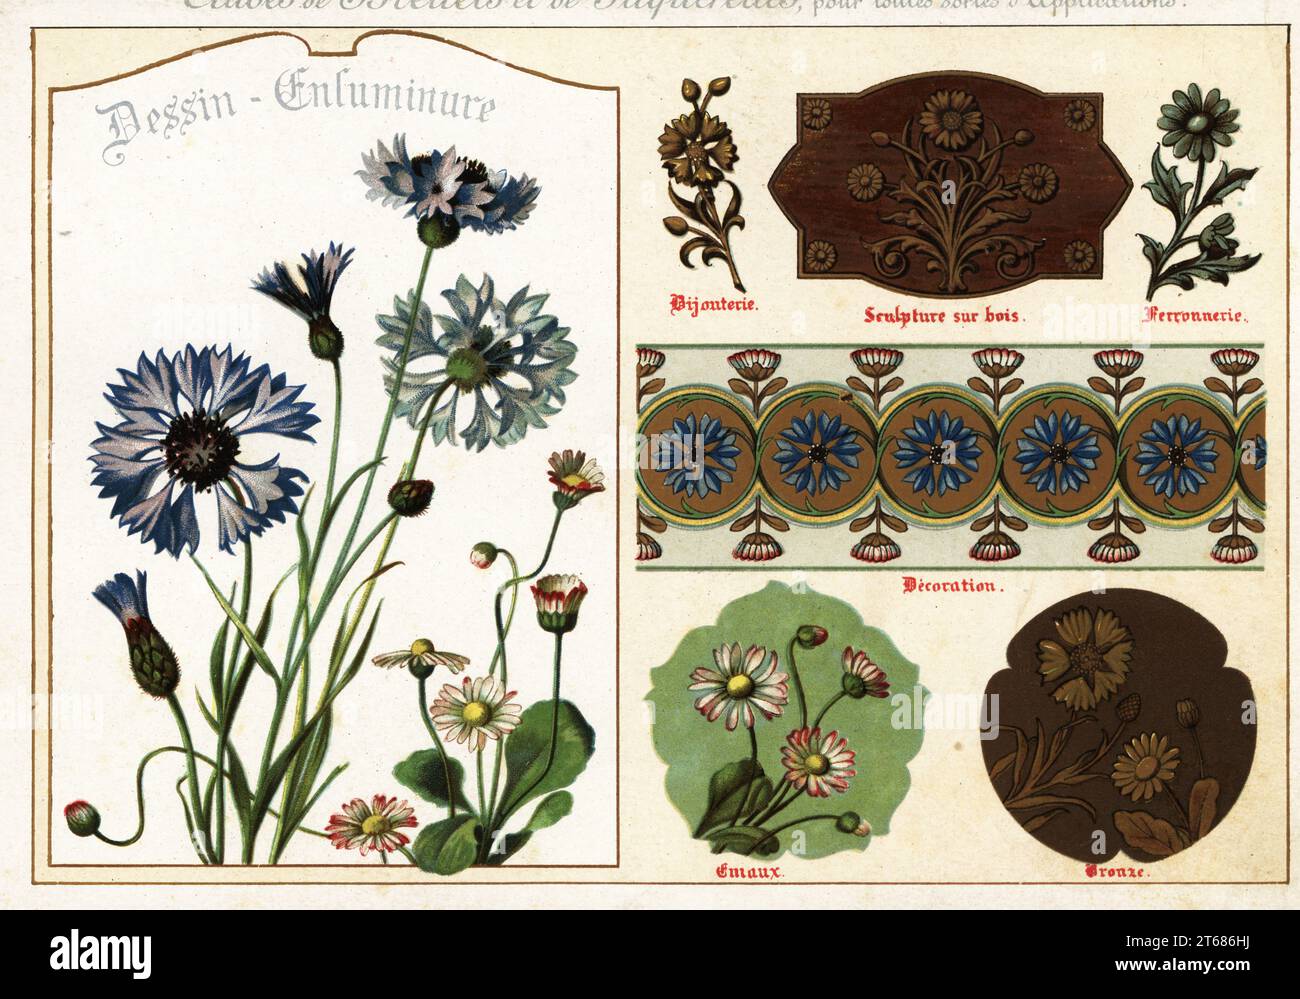 Images of daisies and cornflowers from manuscripts and their applications in wood sculpture, jewelry, enamel, bronze, and ironwork. Chromolithograph designed and lithographed by Ernst Guillot from his Flowers After Nature and Ornamental Flowers, Fleurs d`apres Nature et fleurs ornementales, Paris, 1890. Stock Photo